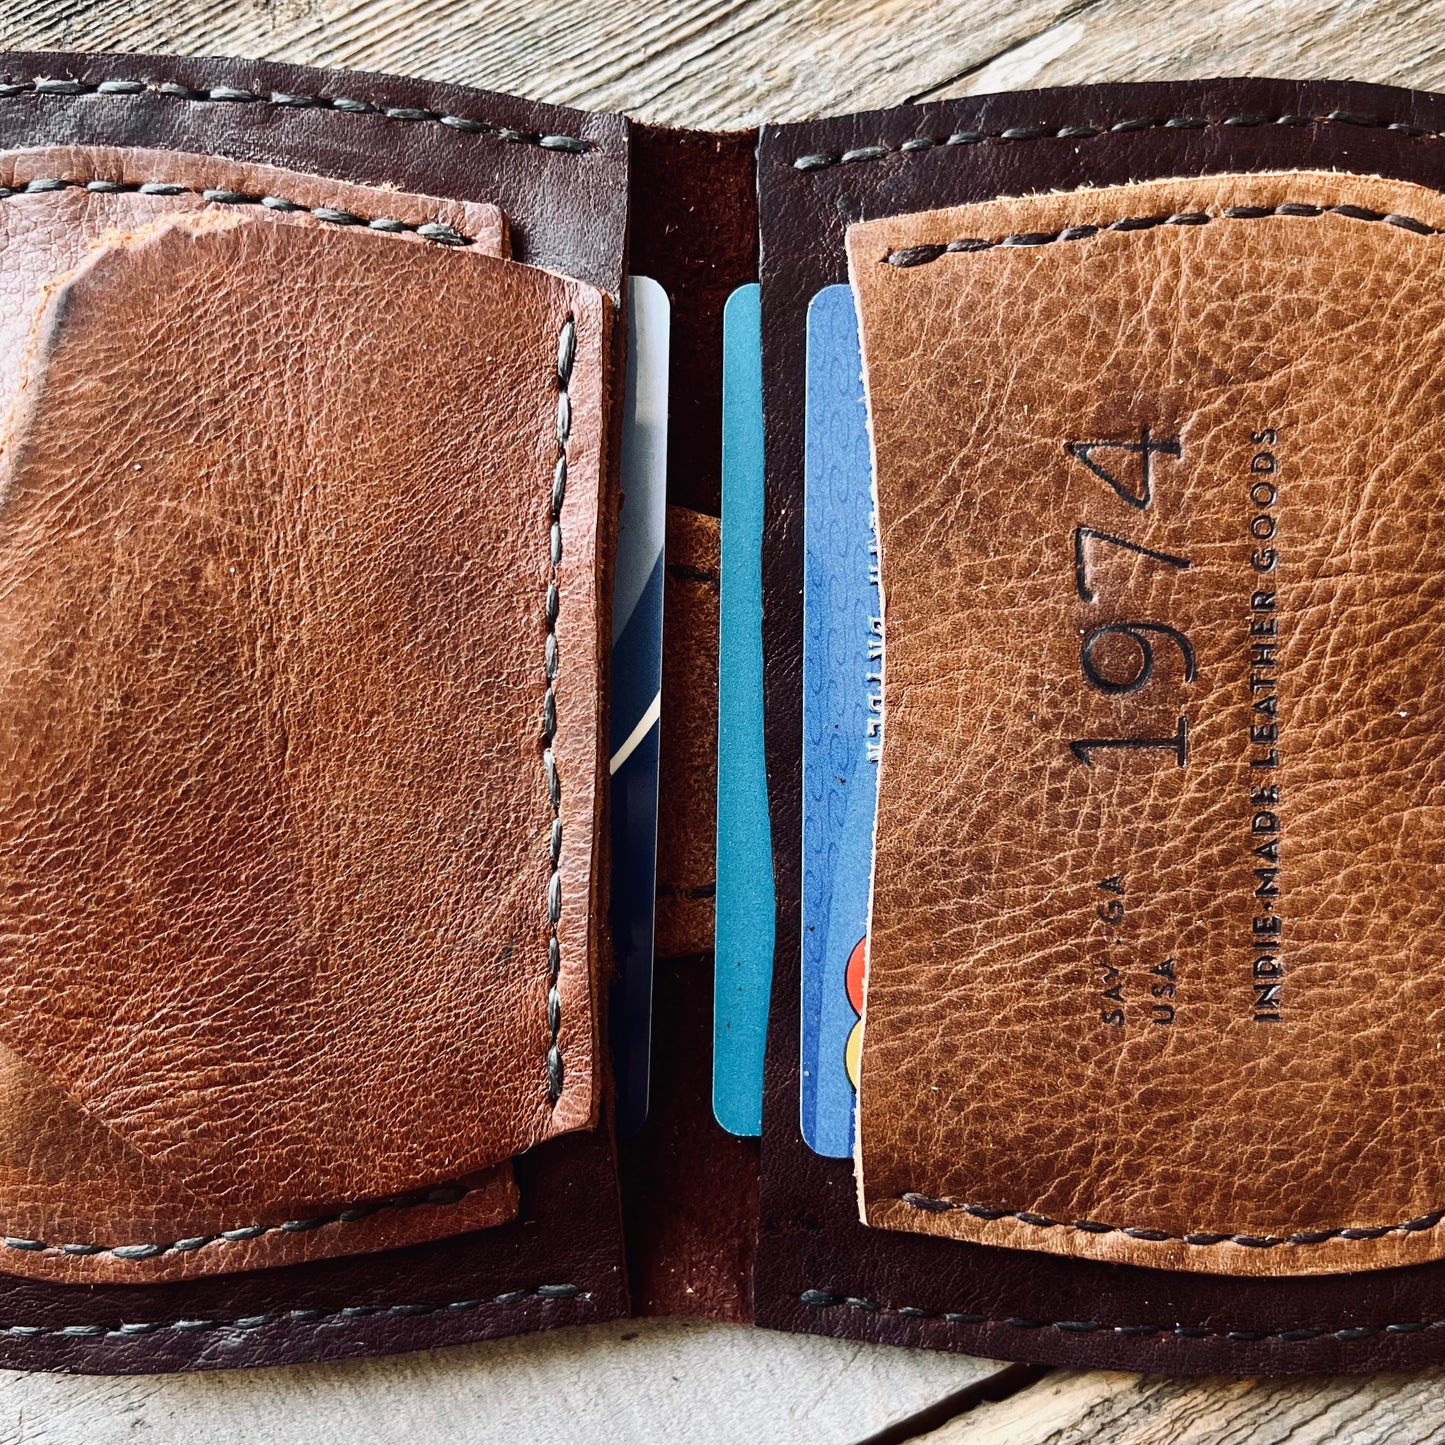 1974 Thames River Leather Wallet in Chestnut & Hickory (RTS)